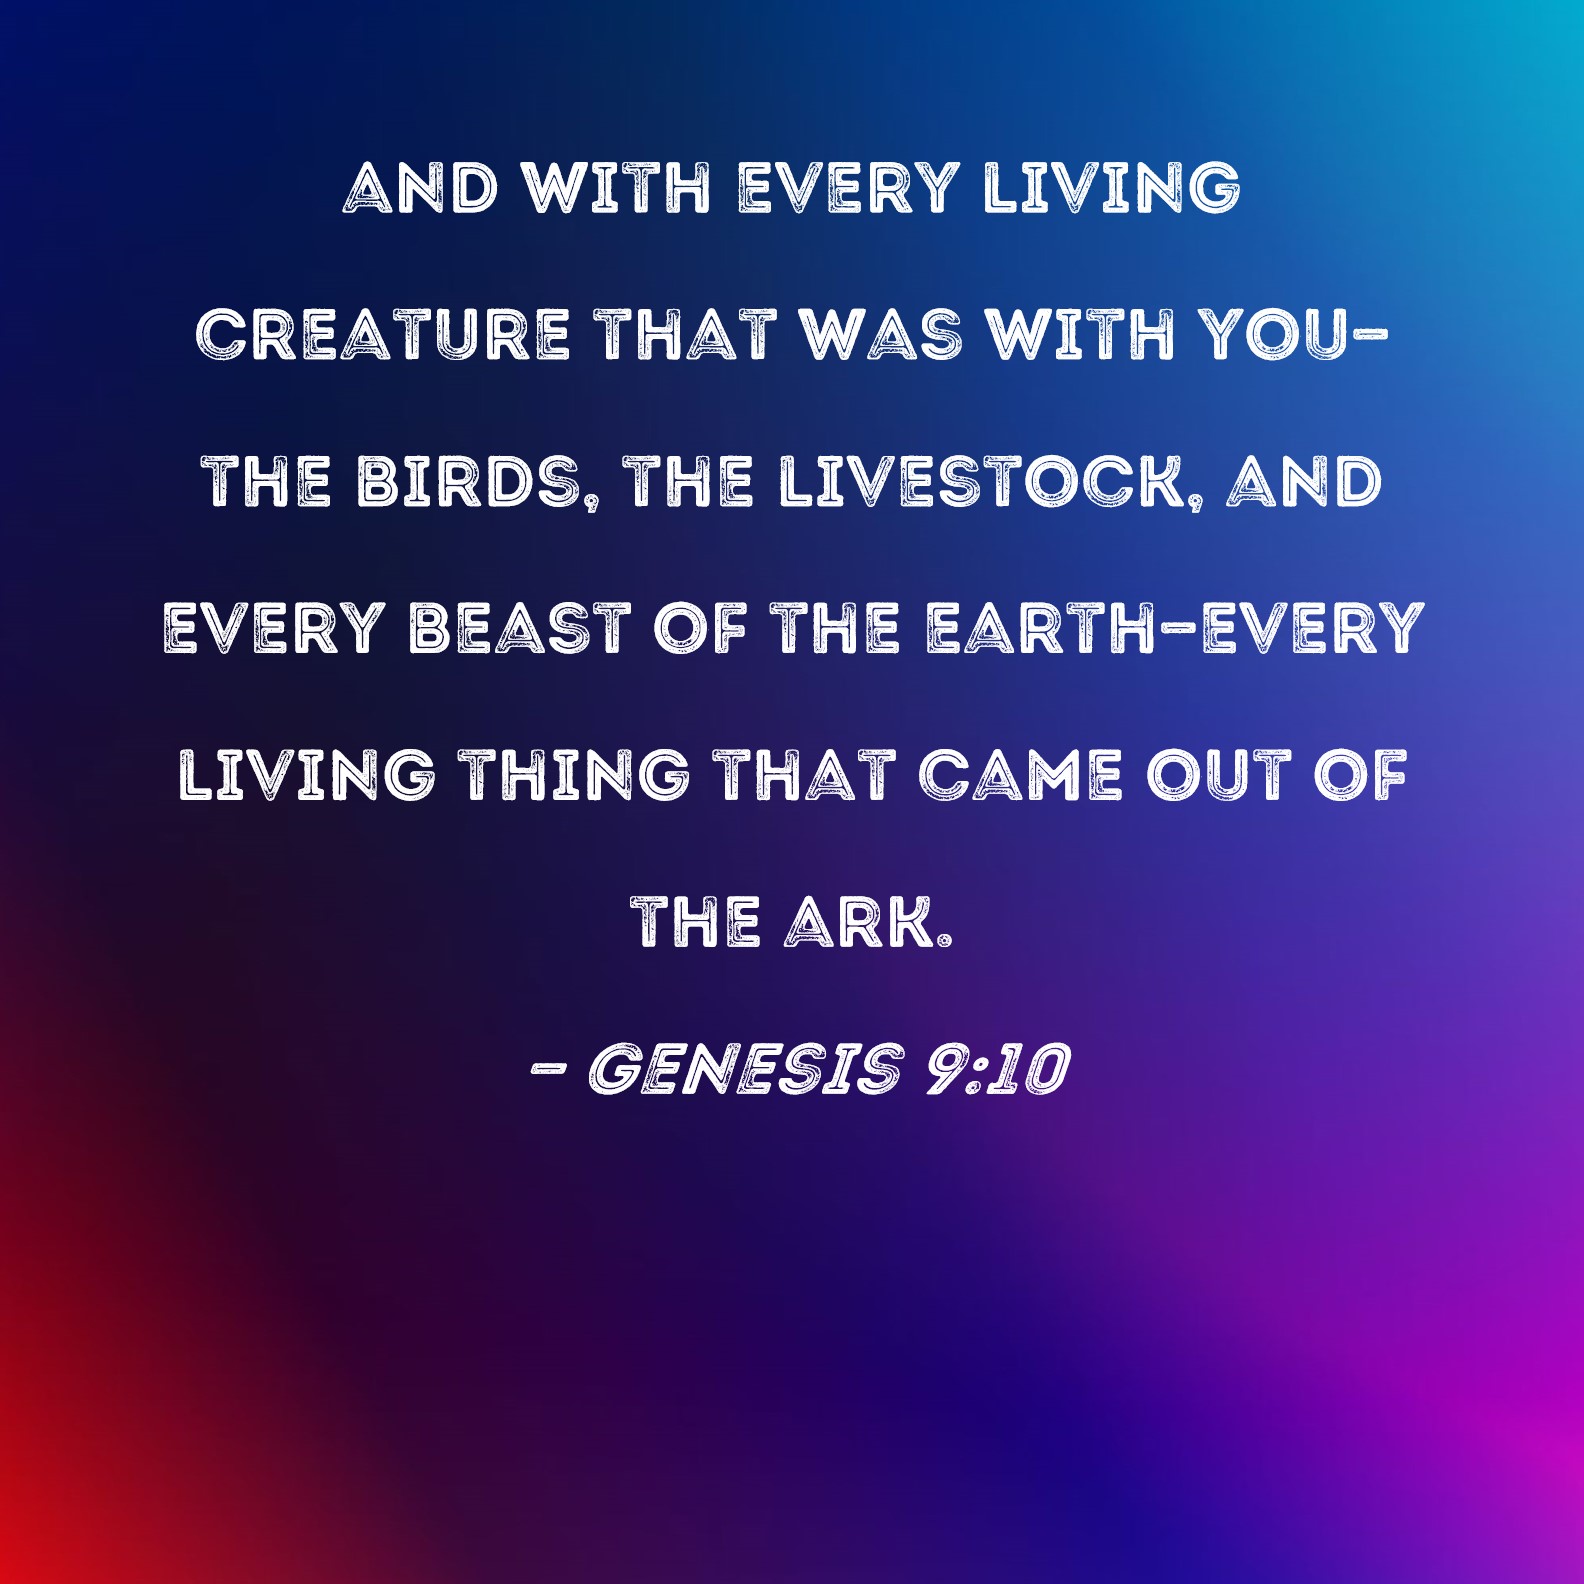 Genesis 9:10 and with every living creature that was with you--the birds,  the livestock, and every beast of the earth--every living thing that came  out of the ark.